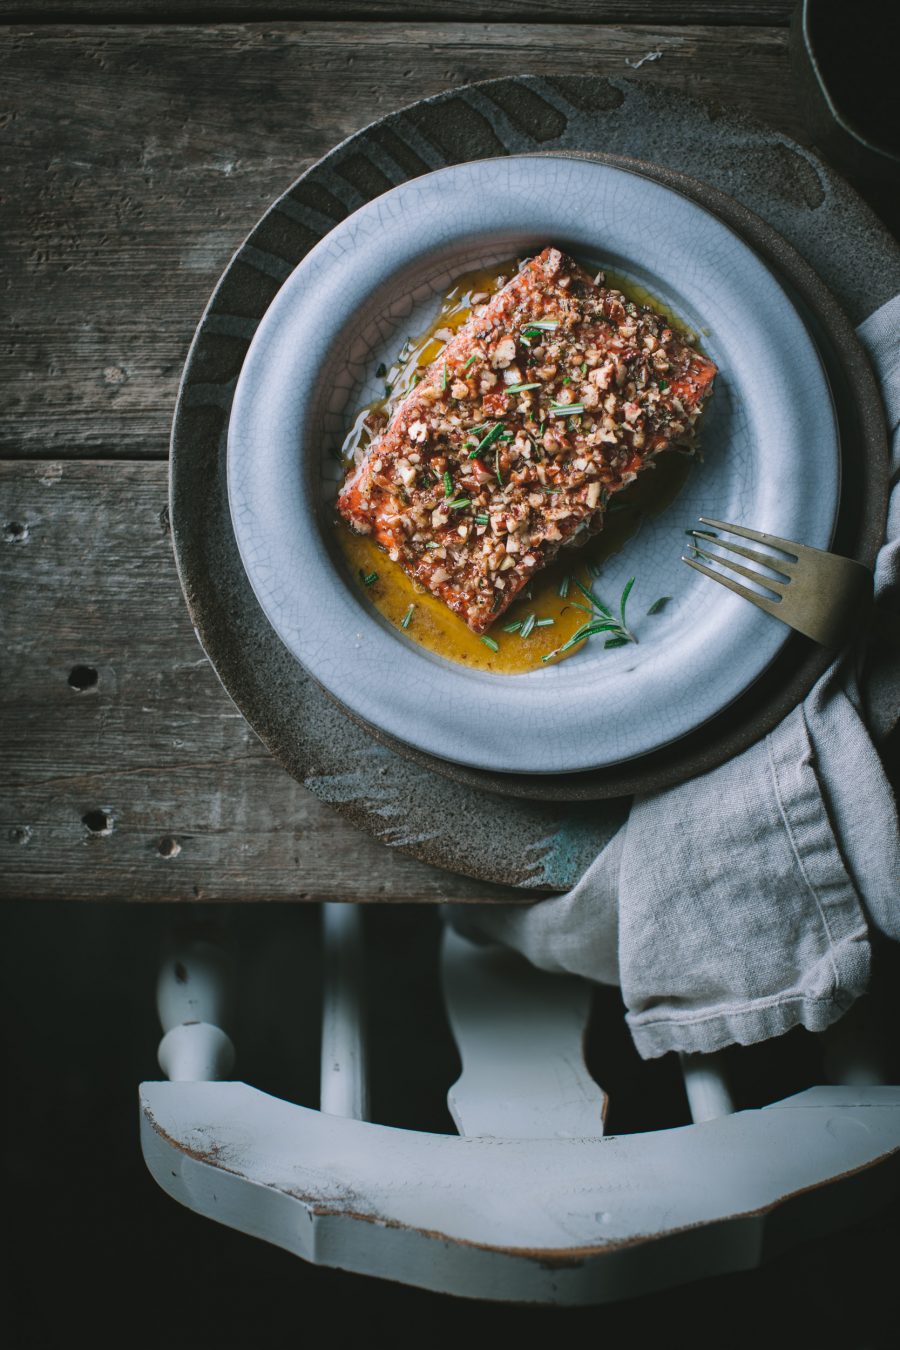 Baked Salmon with a Walnut and Rosemary Crust